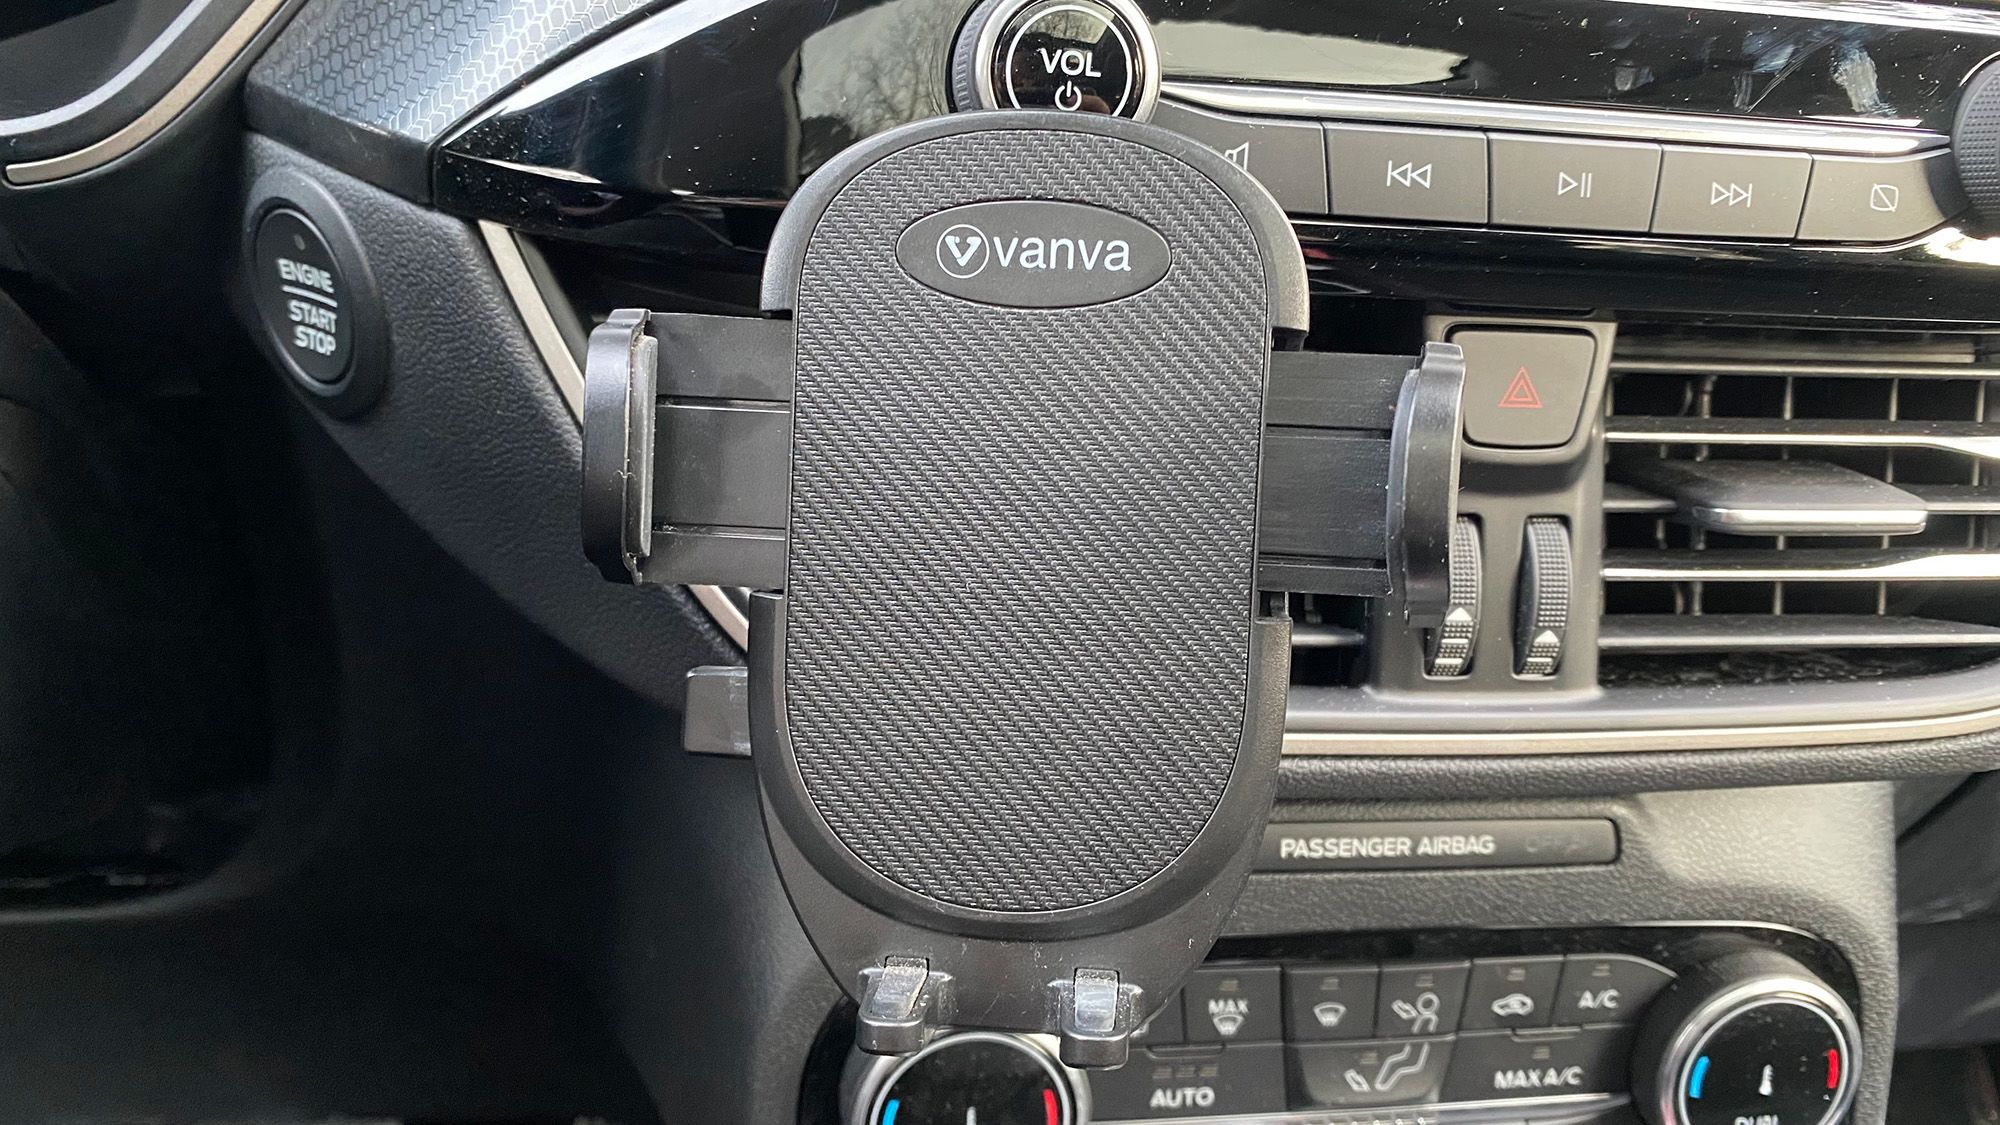 The Vanva air vent car mount is a great under $25  find